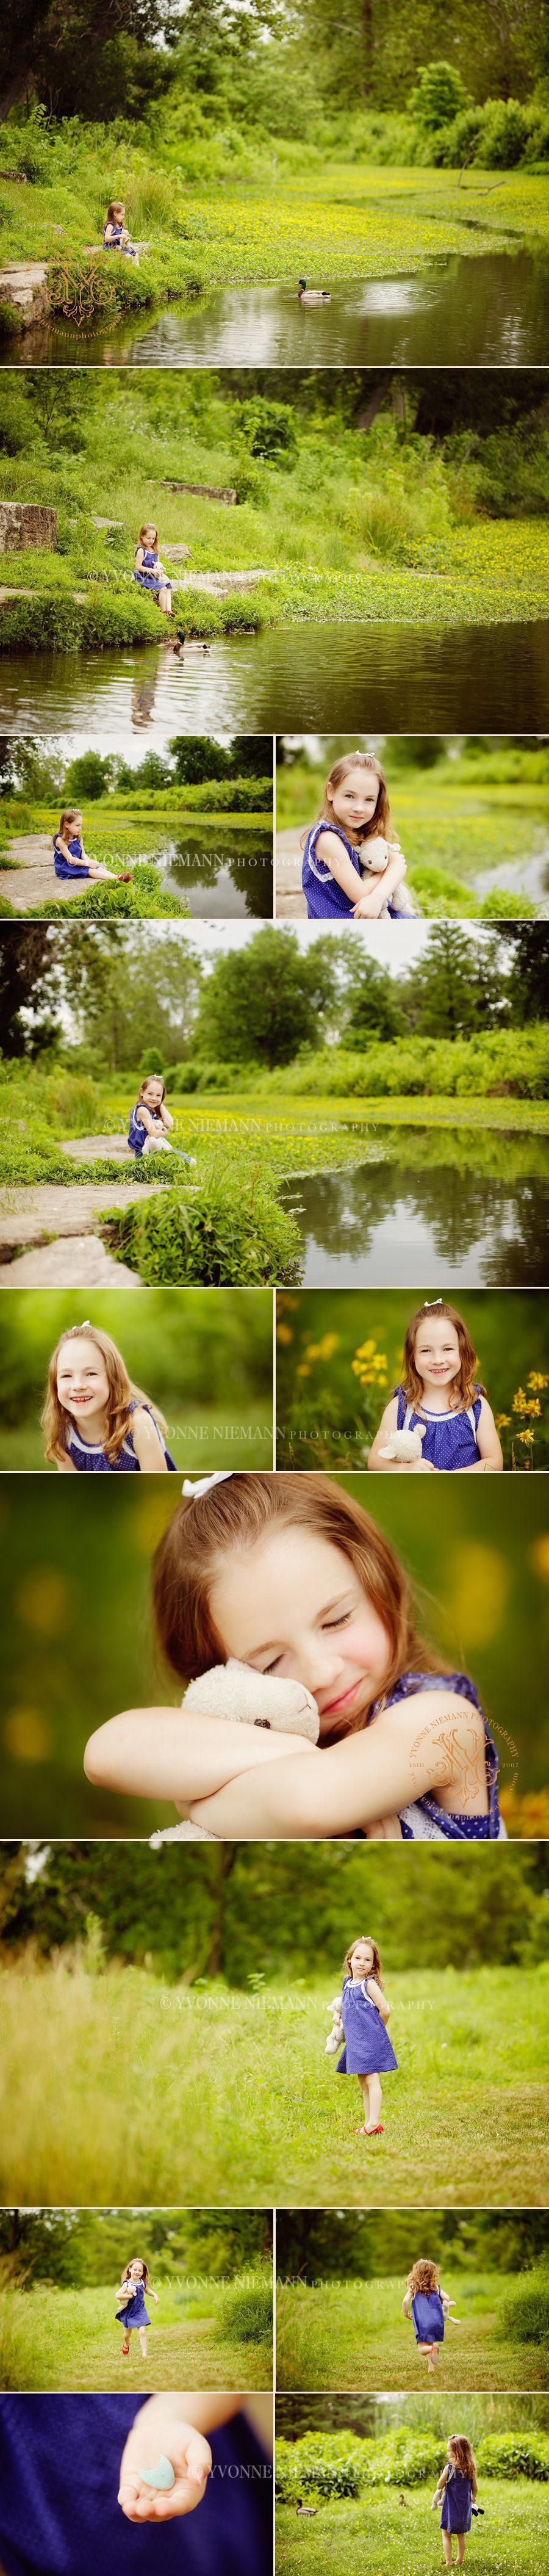 Summer morning portraits around the St. Louis area taken by Yvonne Niemann Photography.